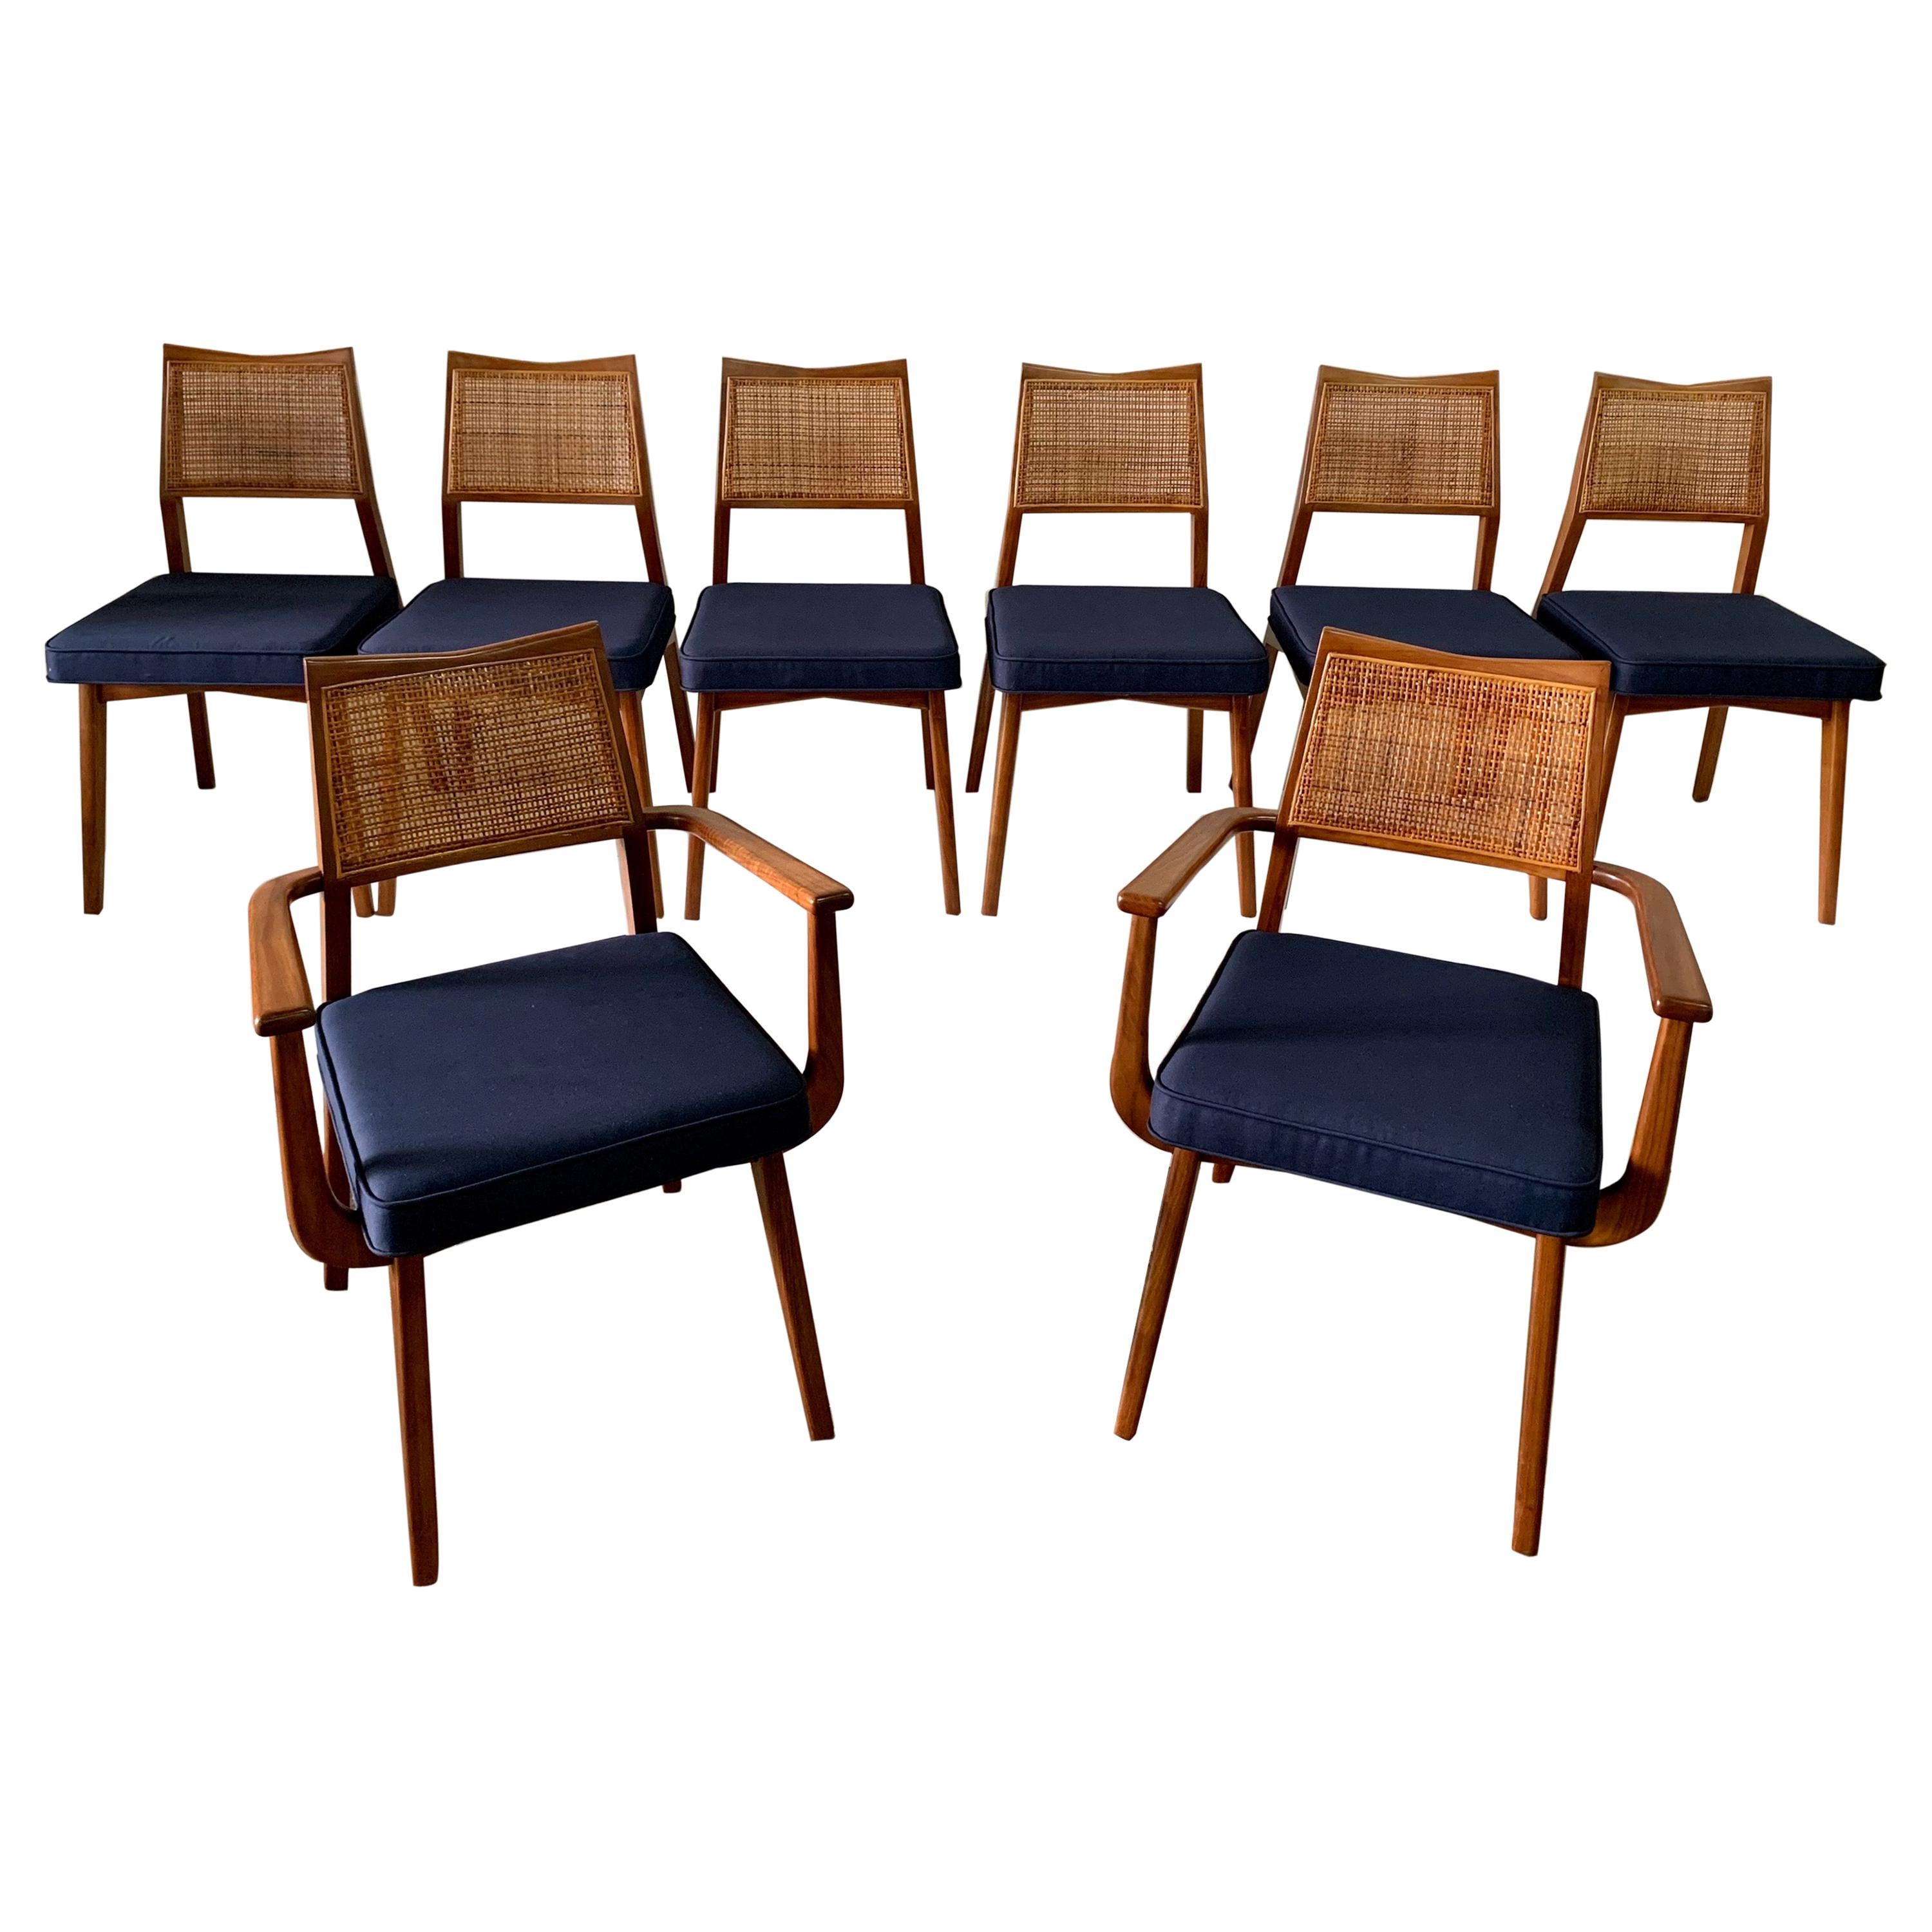 Set of 8 Vintage Walnut and Cane Dining Chairs